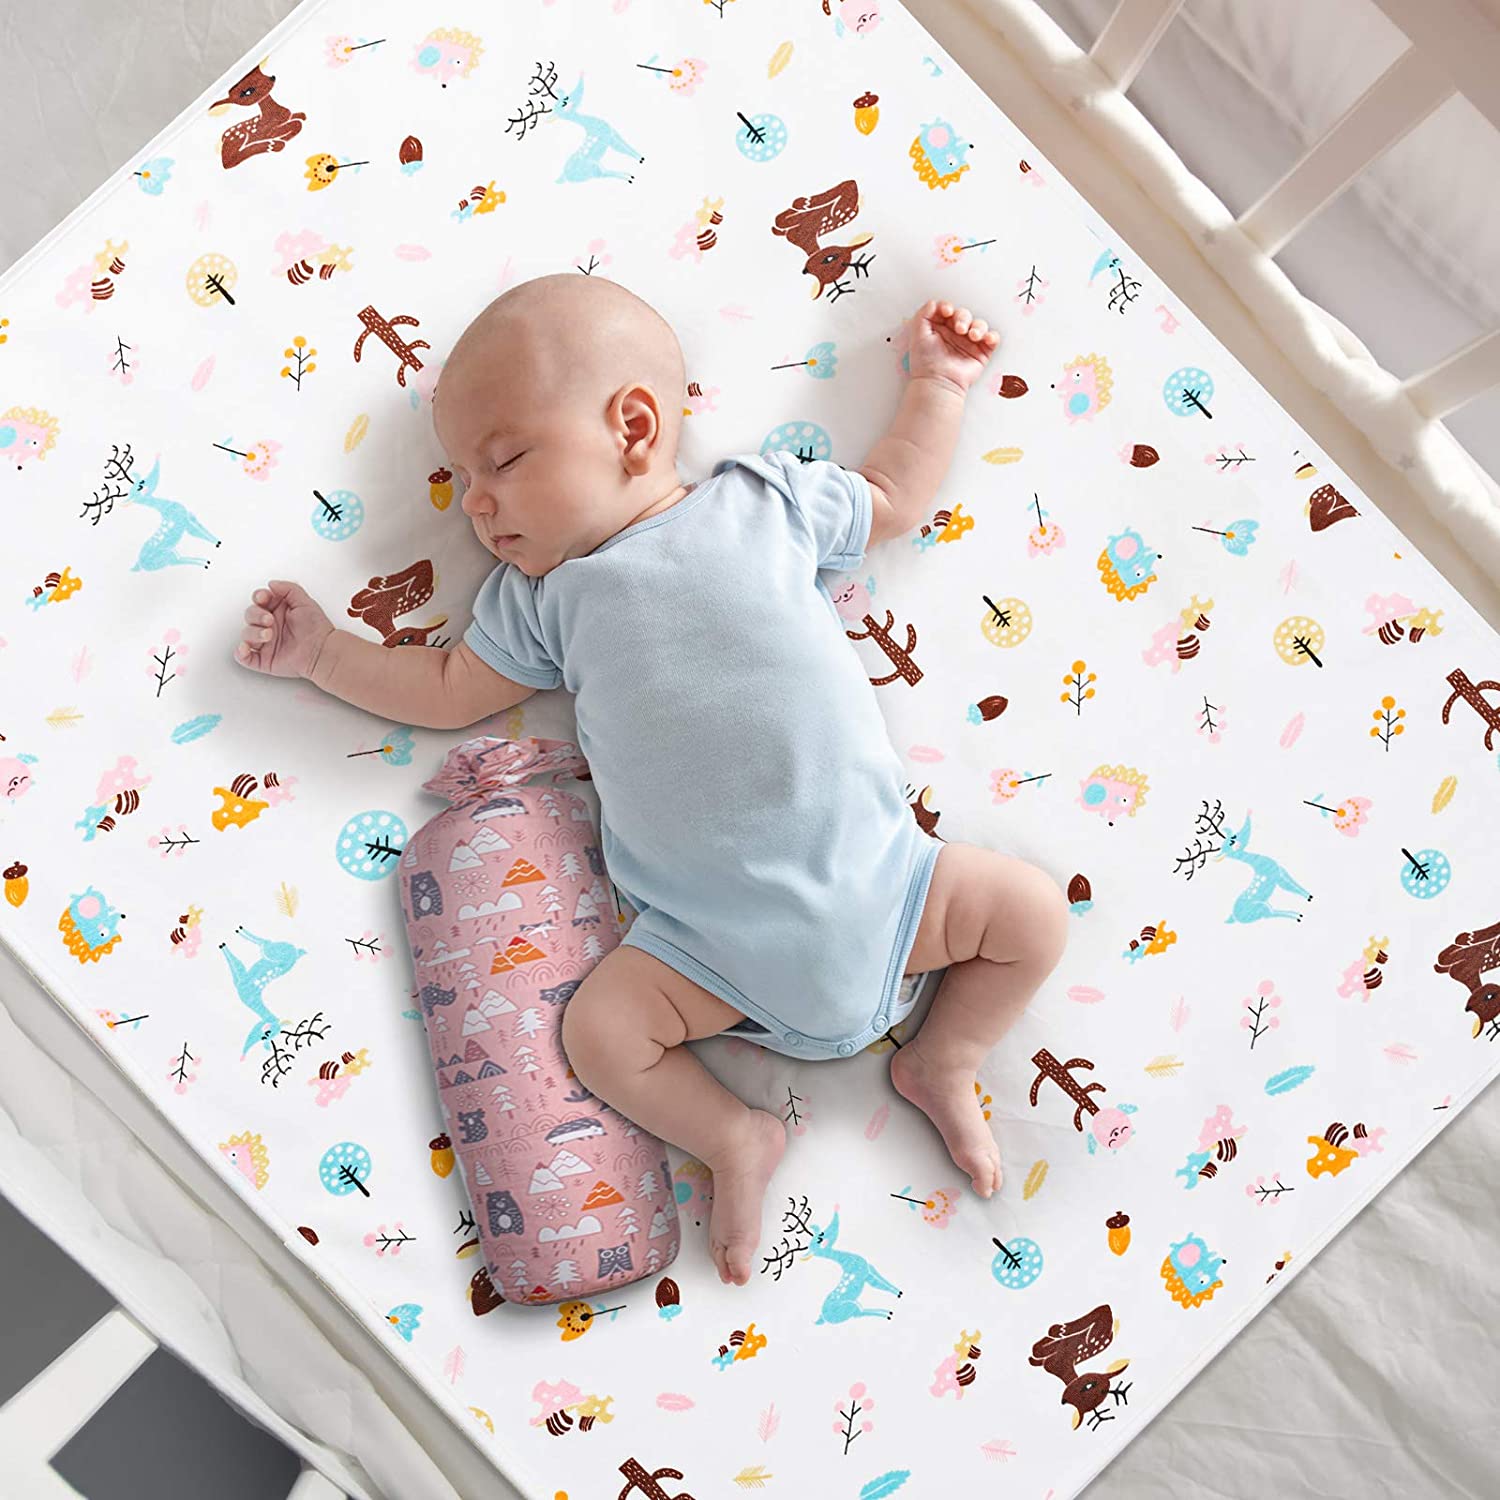 Baby Waterproof Bedding Diapering Changing Mat Washable Breathable Cotton MRDUK 